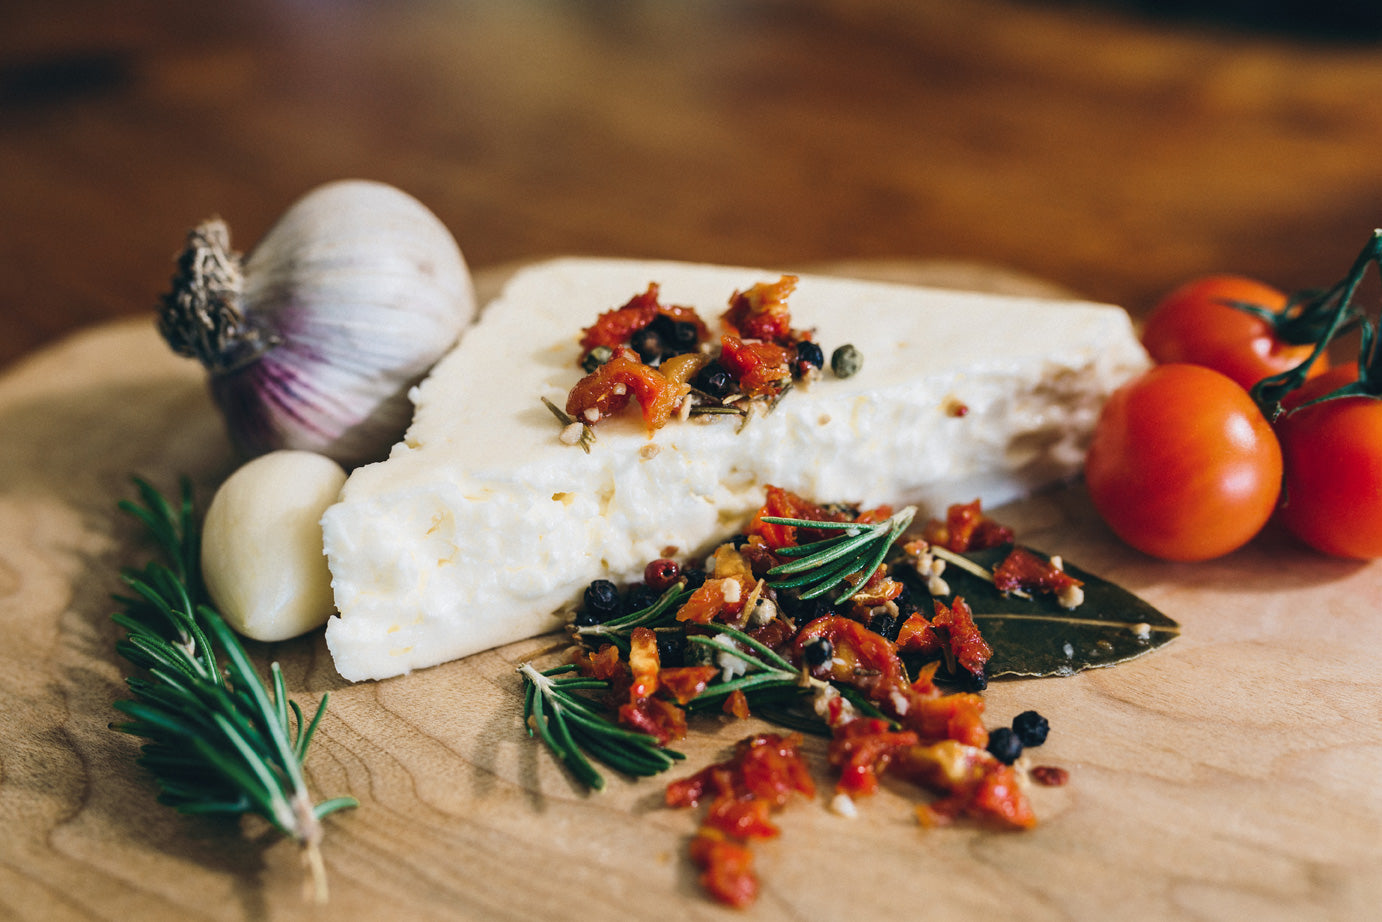 Sunshine Feta is shown with herbs and flavouring it's marinated with, including garlic, rosemary, bayleaf, peppercorns, and sundried tomato.